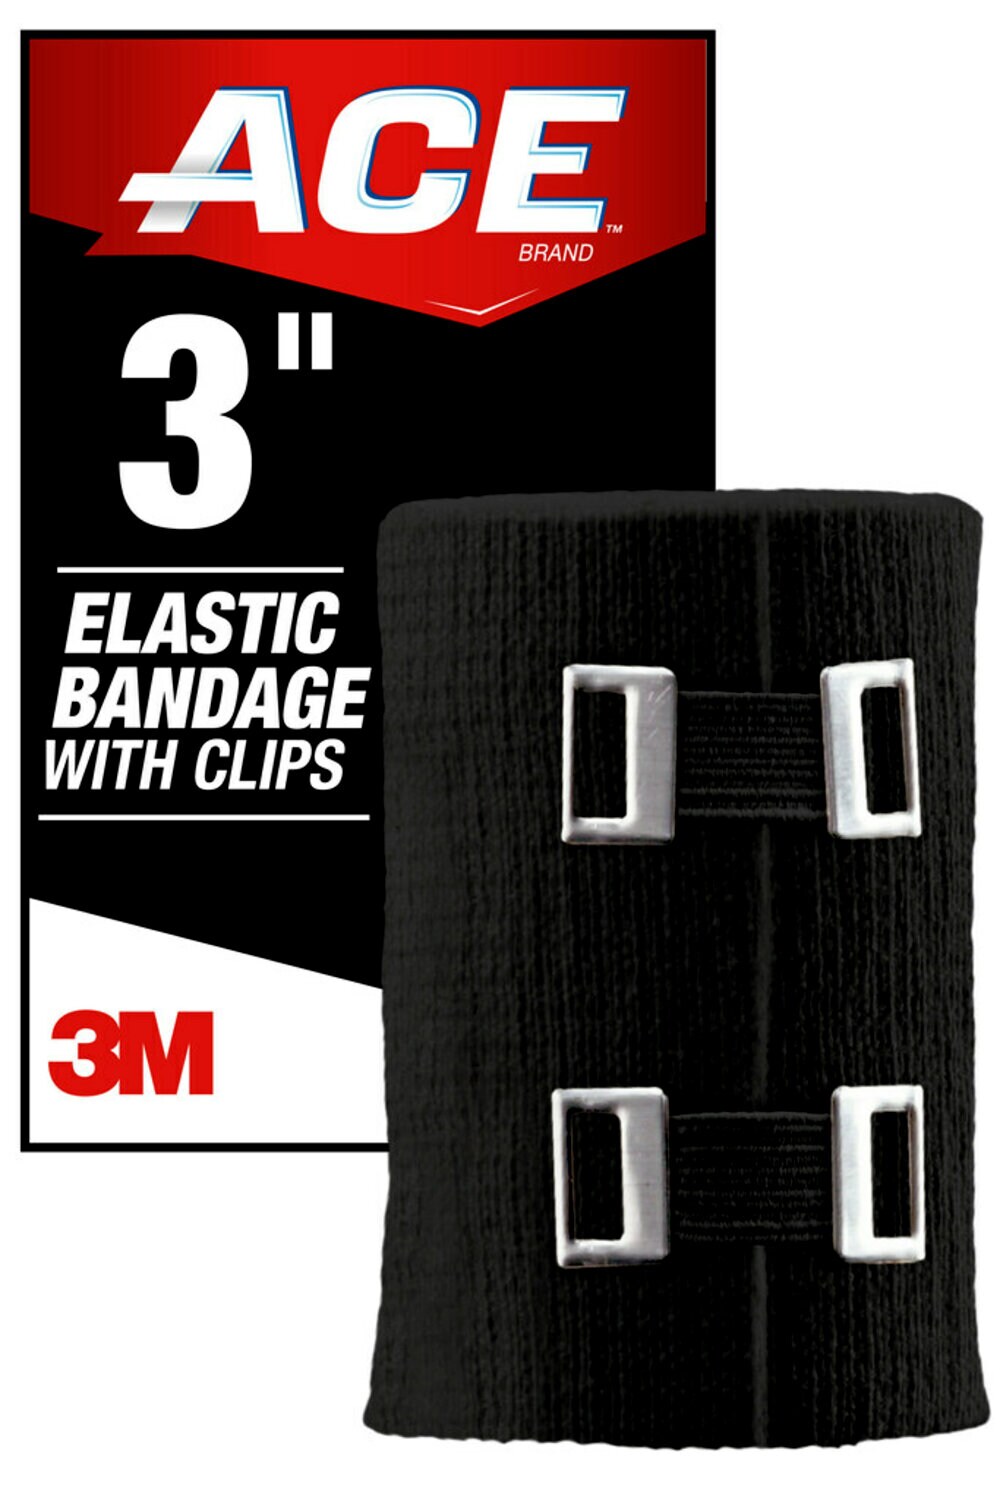 7100157912 - ACE Elastic Bandage, 207333, 3 in x 63.6 in (1.7 yds) (7.6 cm x 1.6 m),
Black w/Metal Clips